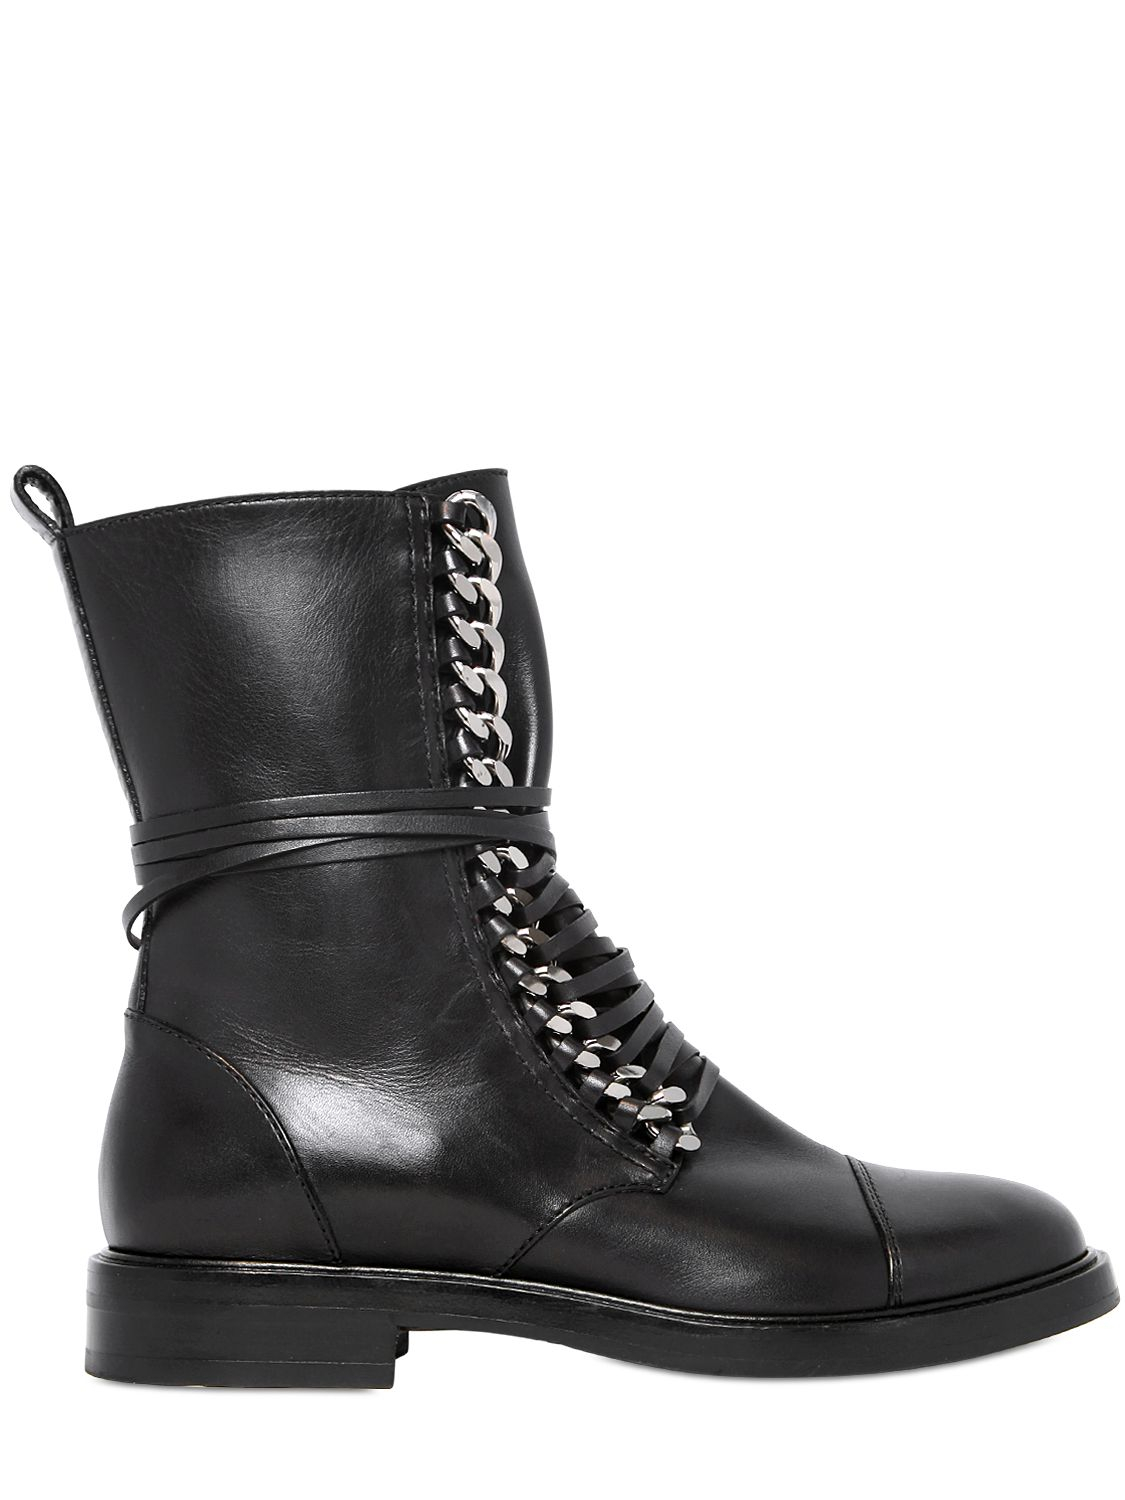 Casadei 30mm Chain Detail Leather Combat Boots in Black | Lyst